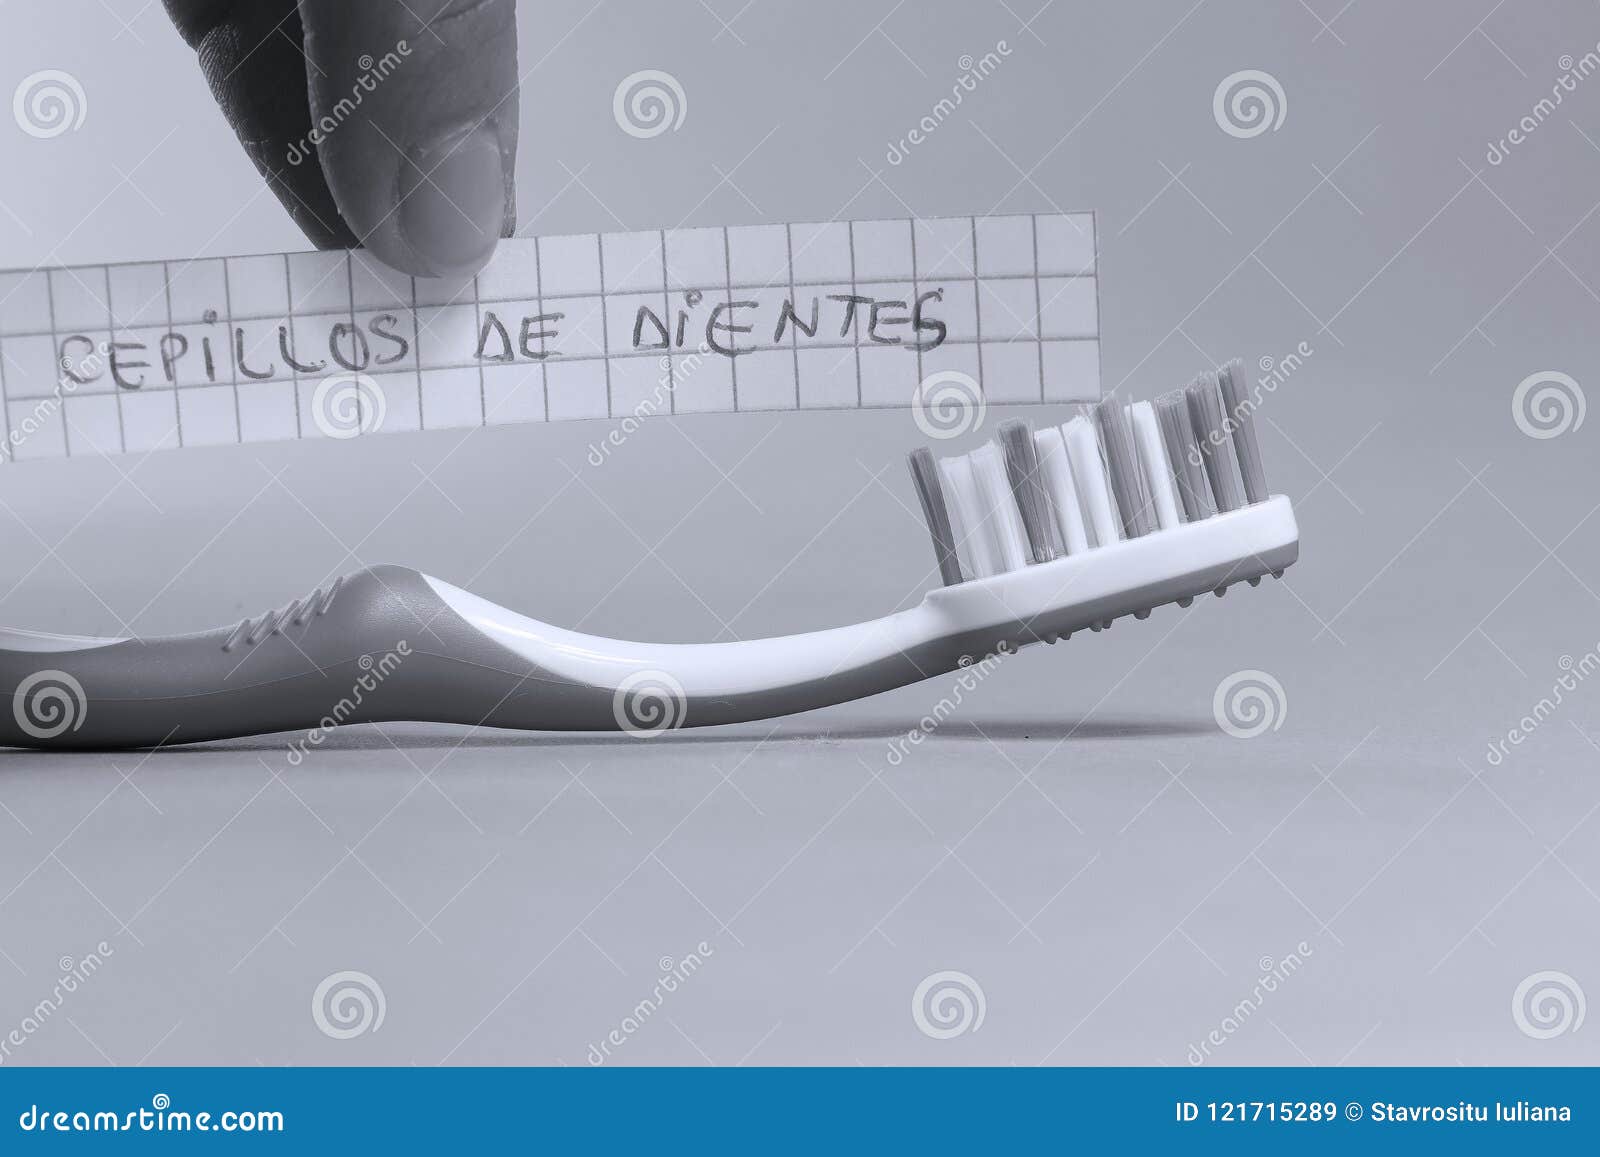 toothbrush written on a small paper, cepillos de dientes in spanish